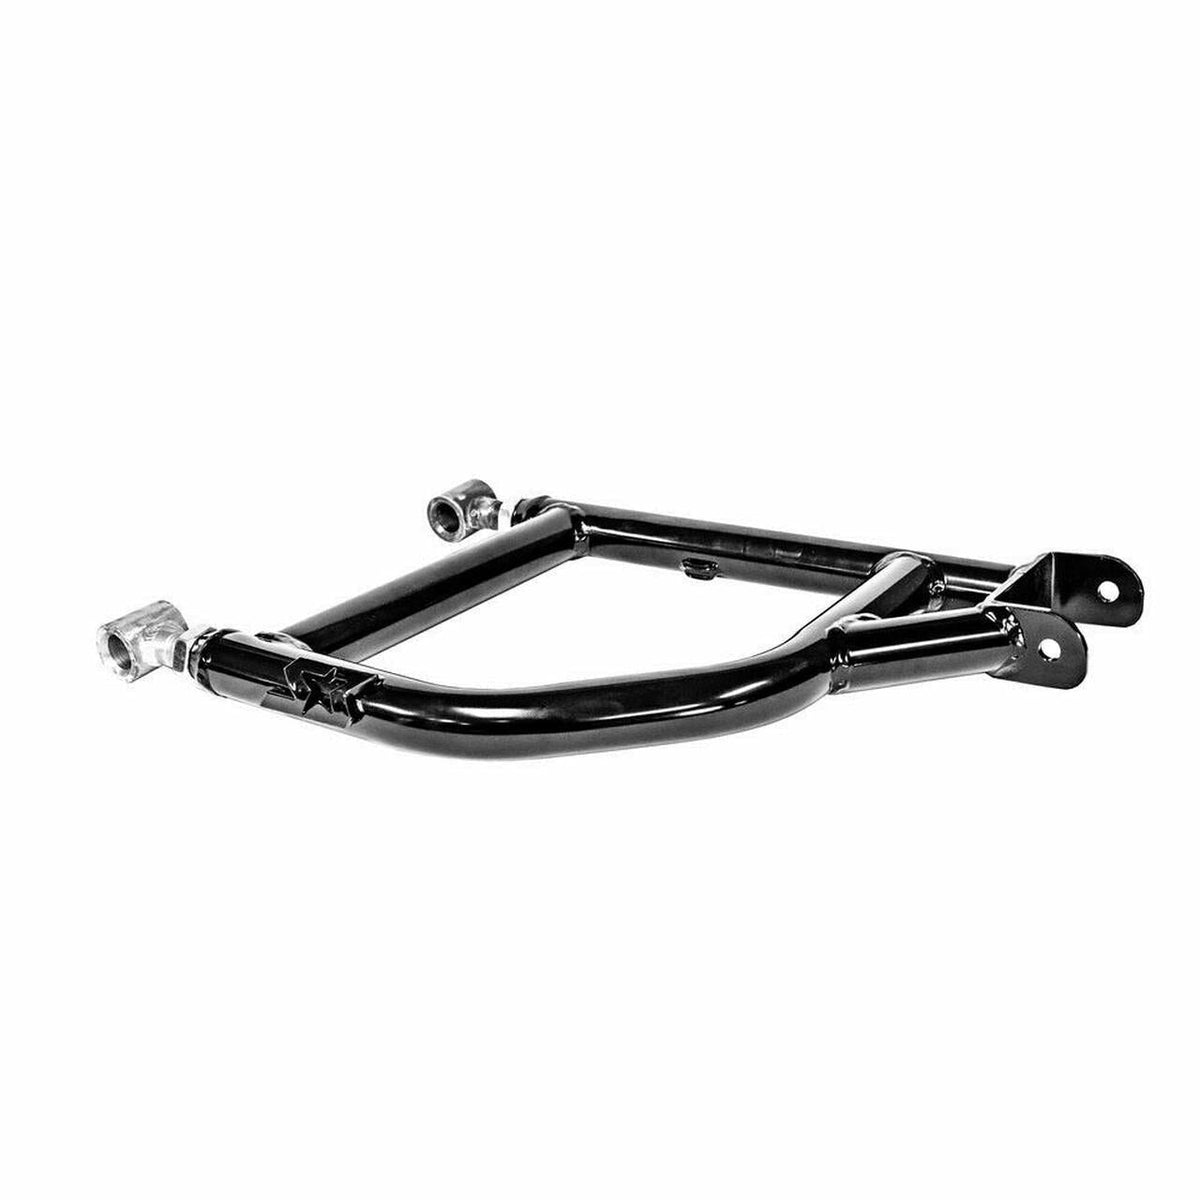 S3 Power Sports Can Am Defender Rear Upper Adjustable A-Arms